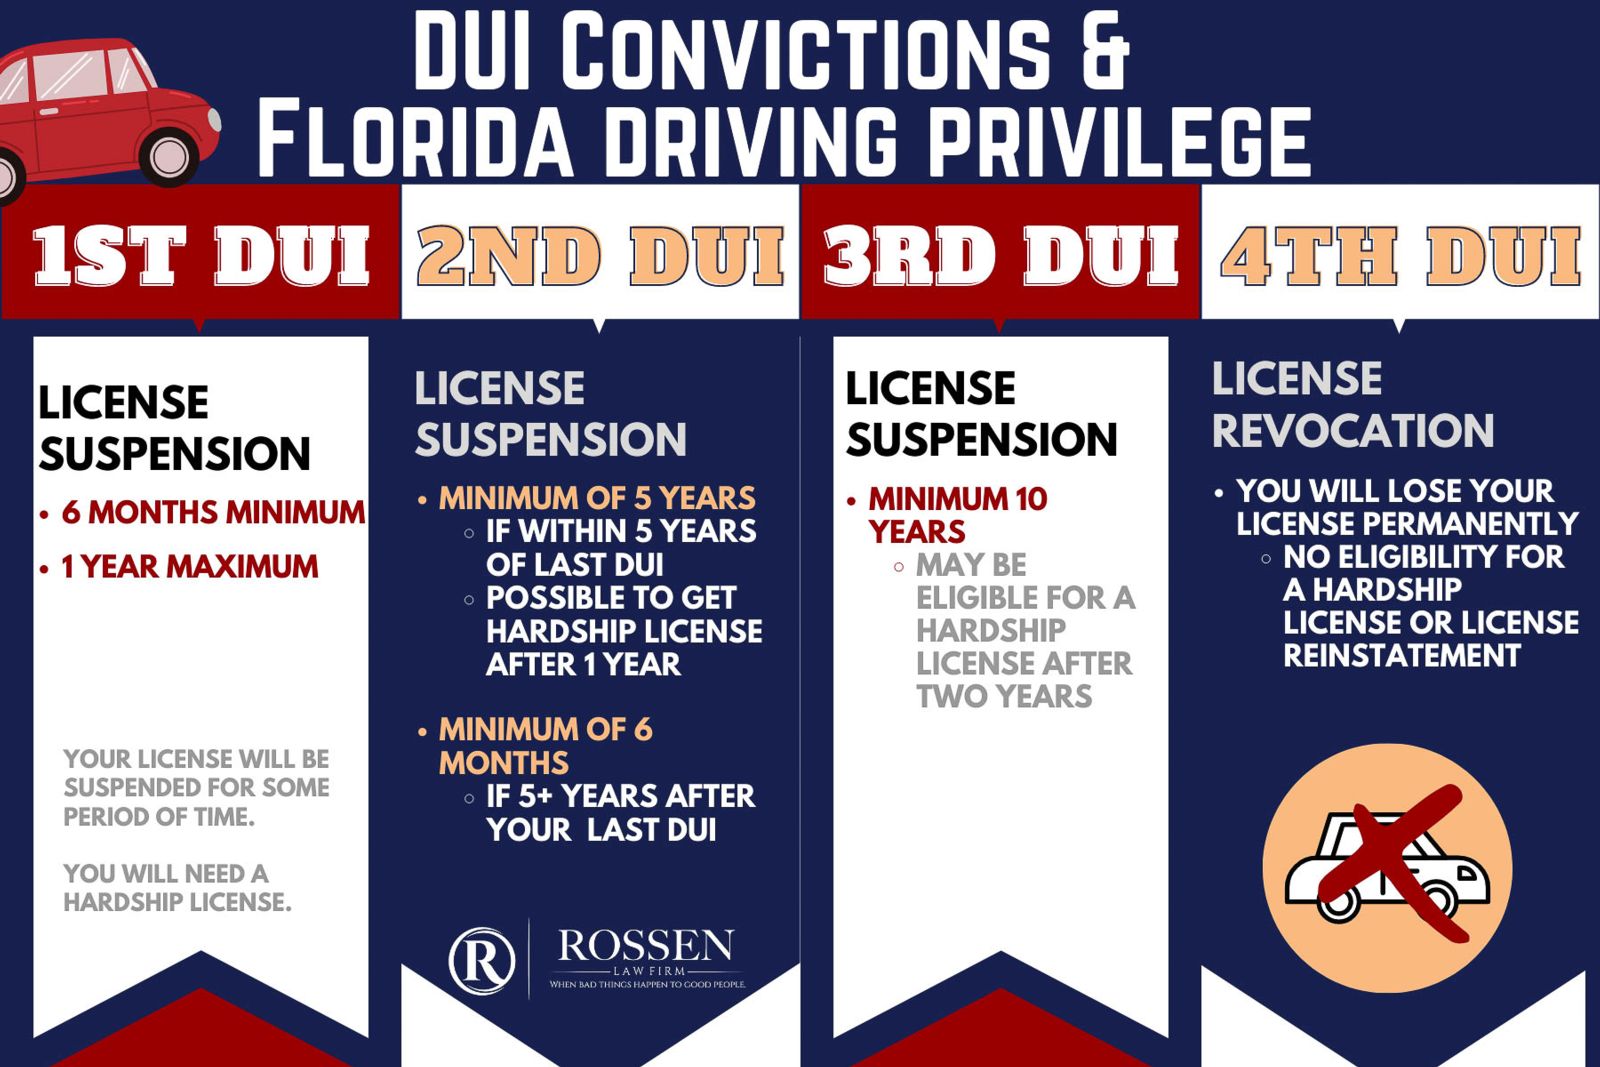 An infographic made by DUI attorneys about DUI convictions and driving privileges in Fort Lauderdale and South Florida 